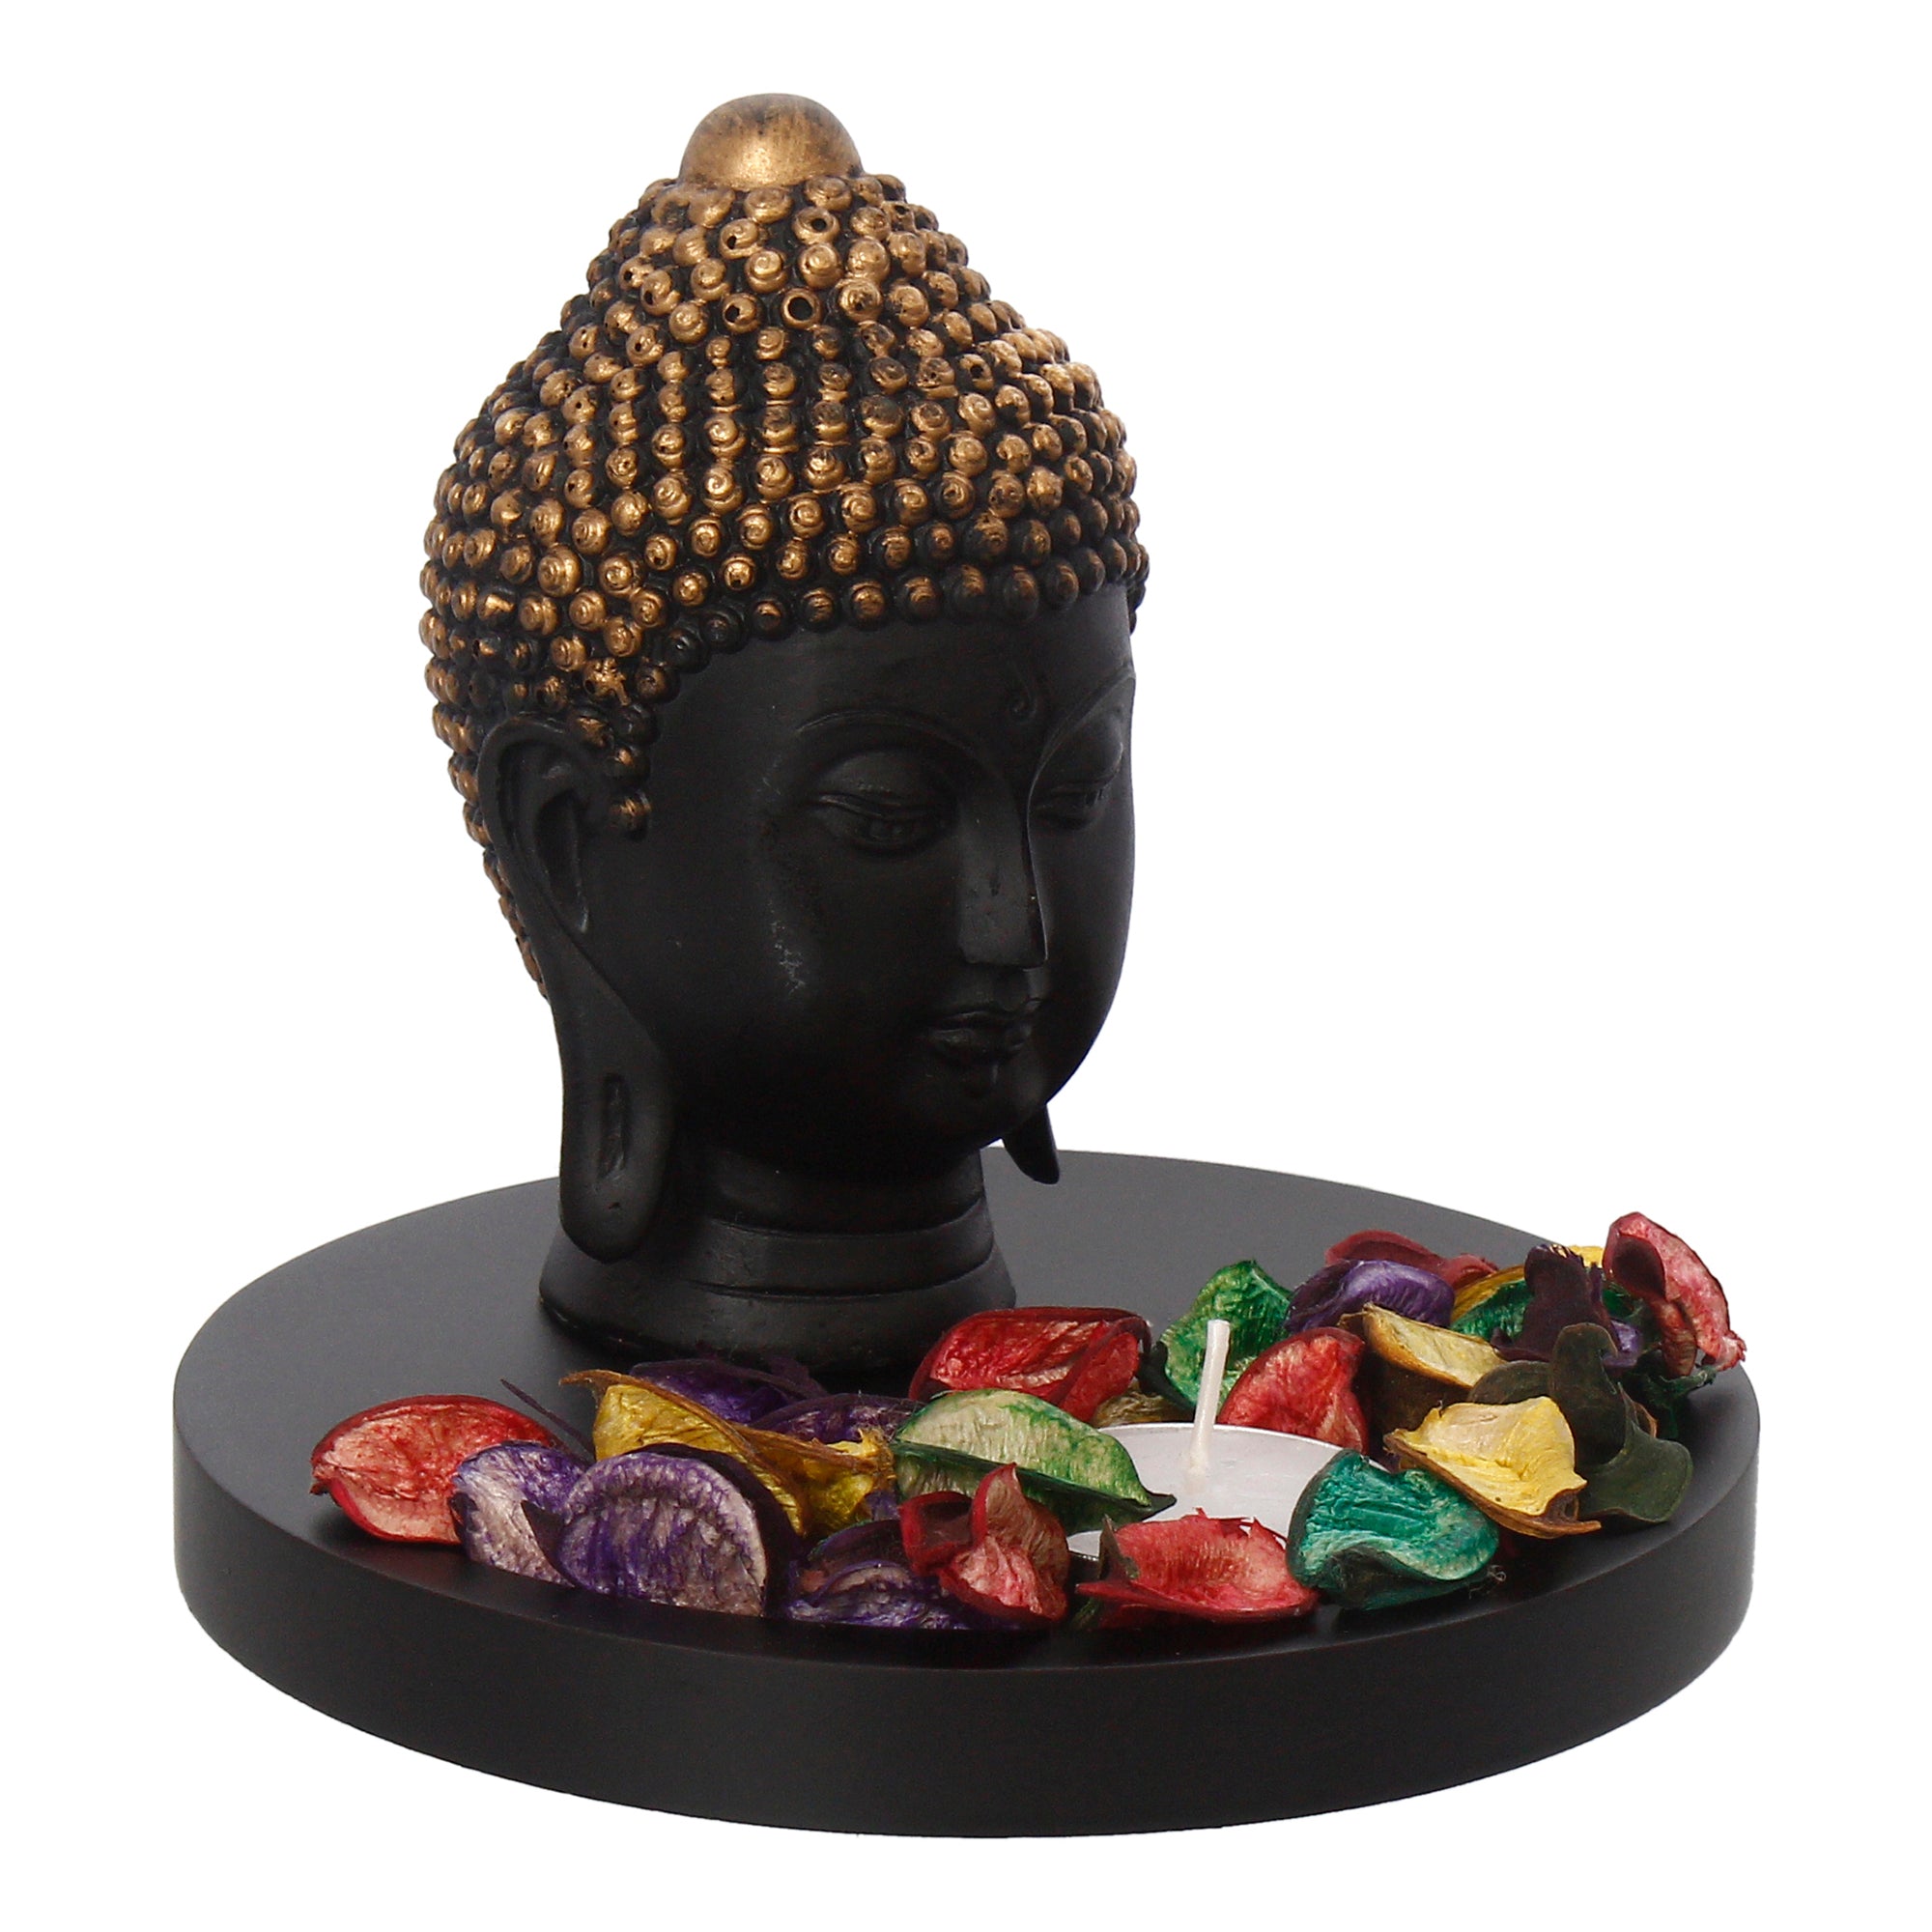 Decorative Black and Golden Buddha Head Statue with Wooden Base, Fragranced Petals and Tealight 4